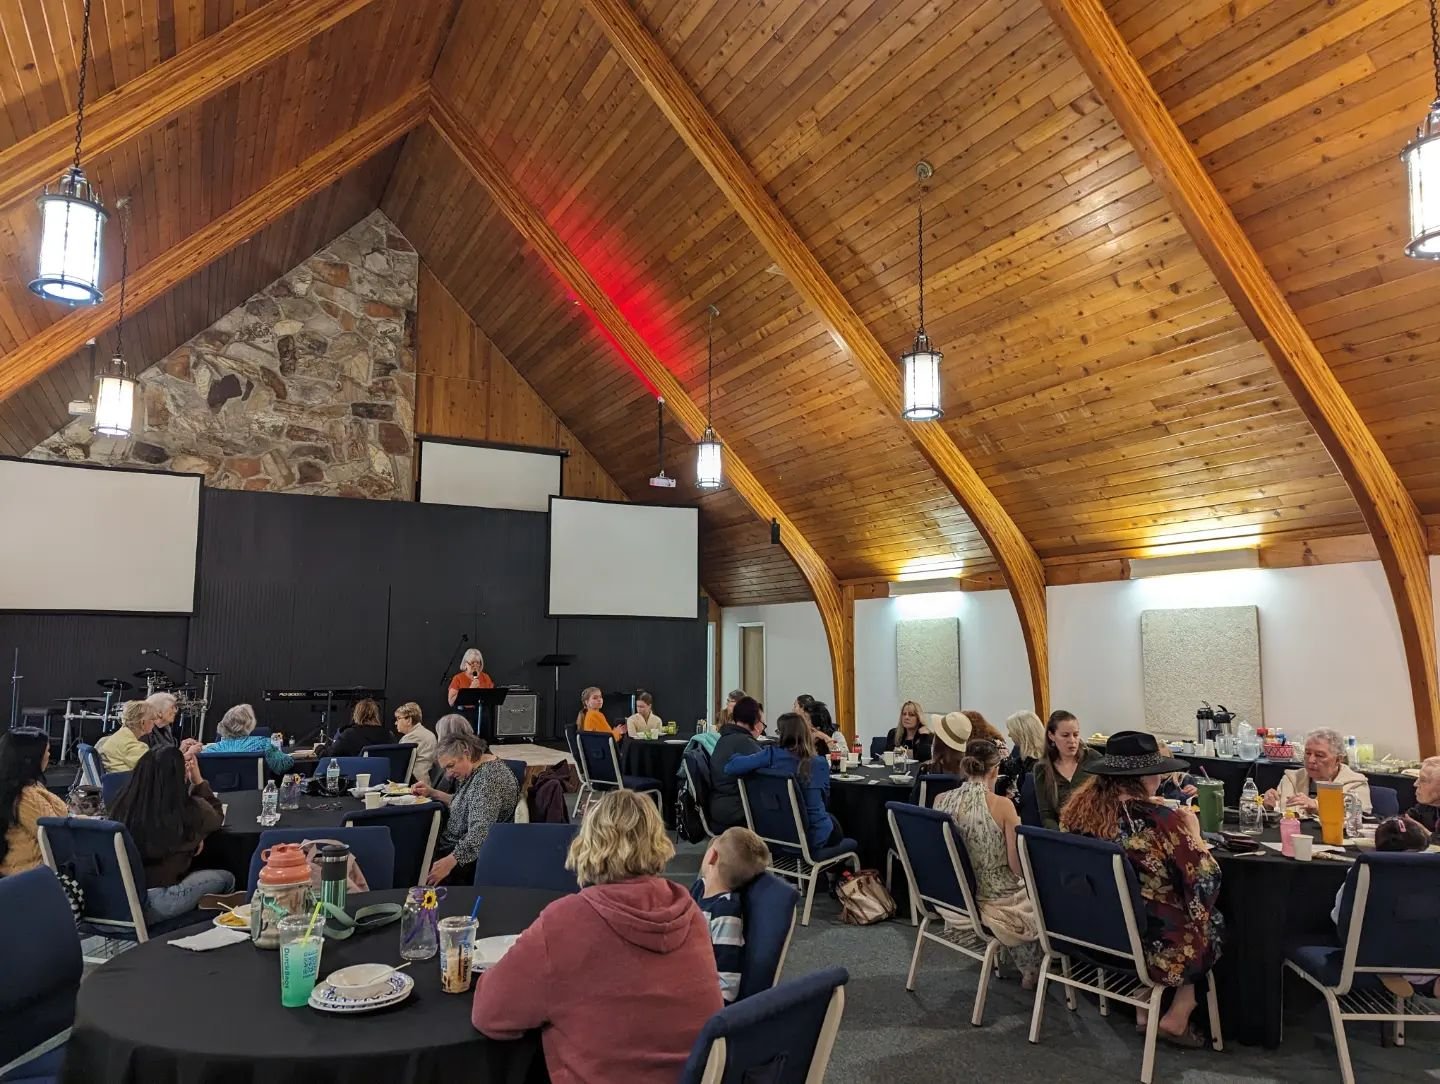 Our ladies event was amazing on Sunday, thank you to everyone who helped make this day possible! We are so grateful for the devotional message and testimony that was shared ❤️

#canyonroadchurchutah #ogdenutahchurch #ogdenutahladieslunch #ogdenutahwo